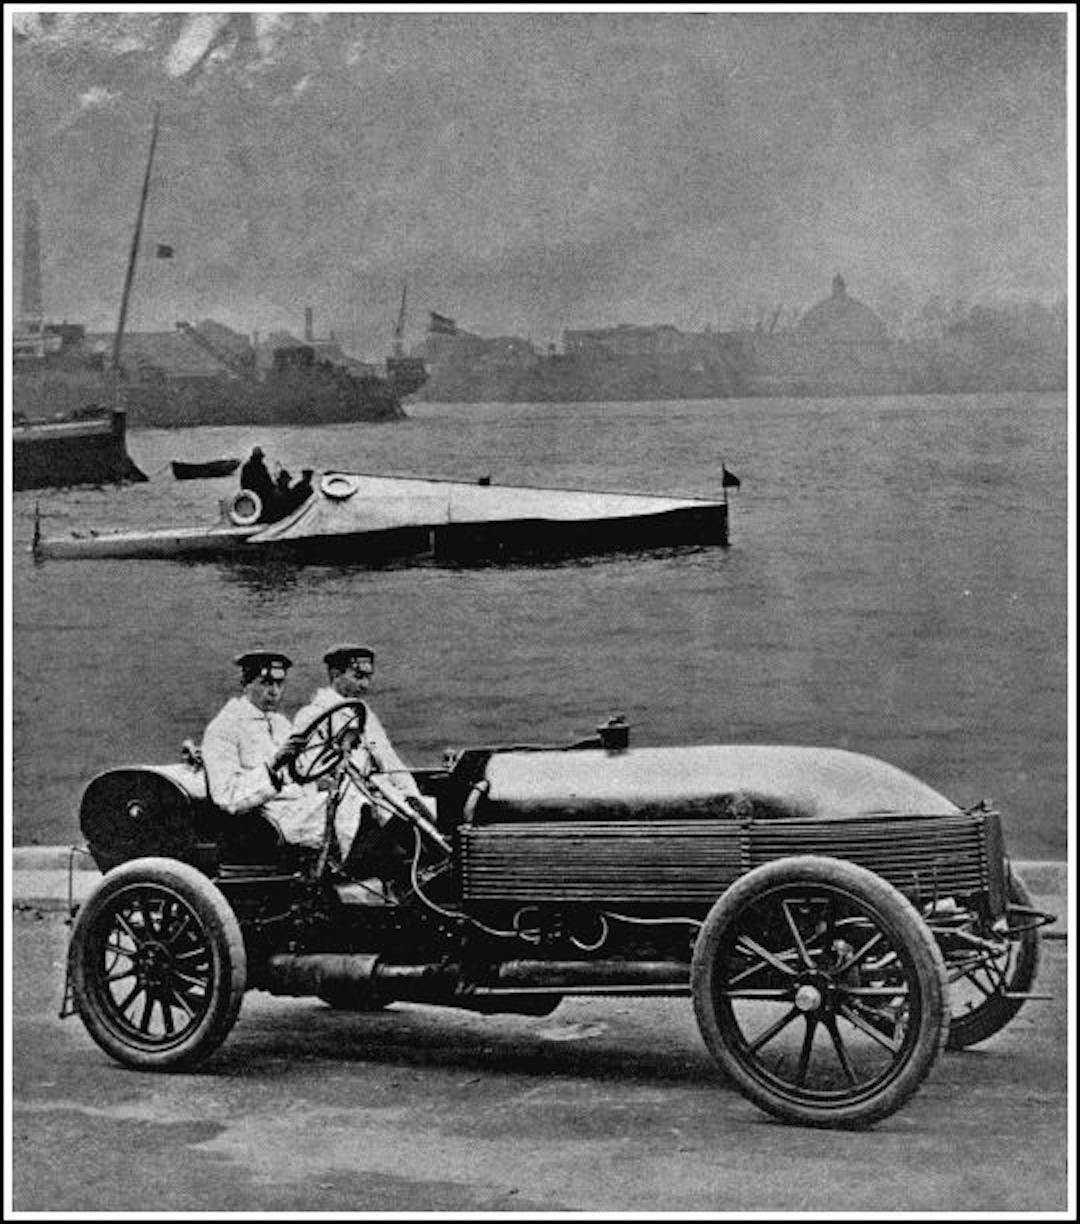 A MODERN CAR AND BOAT